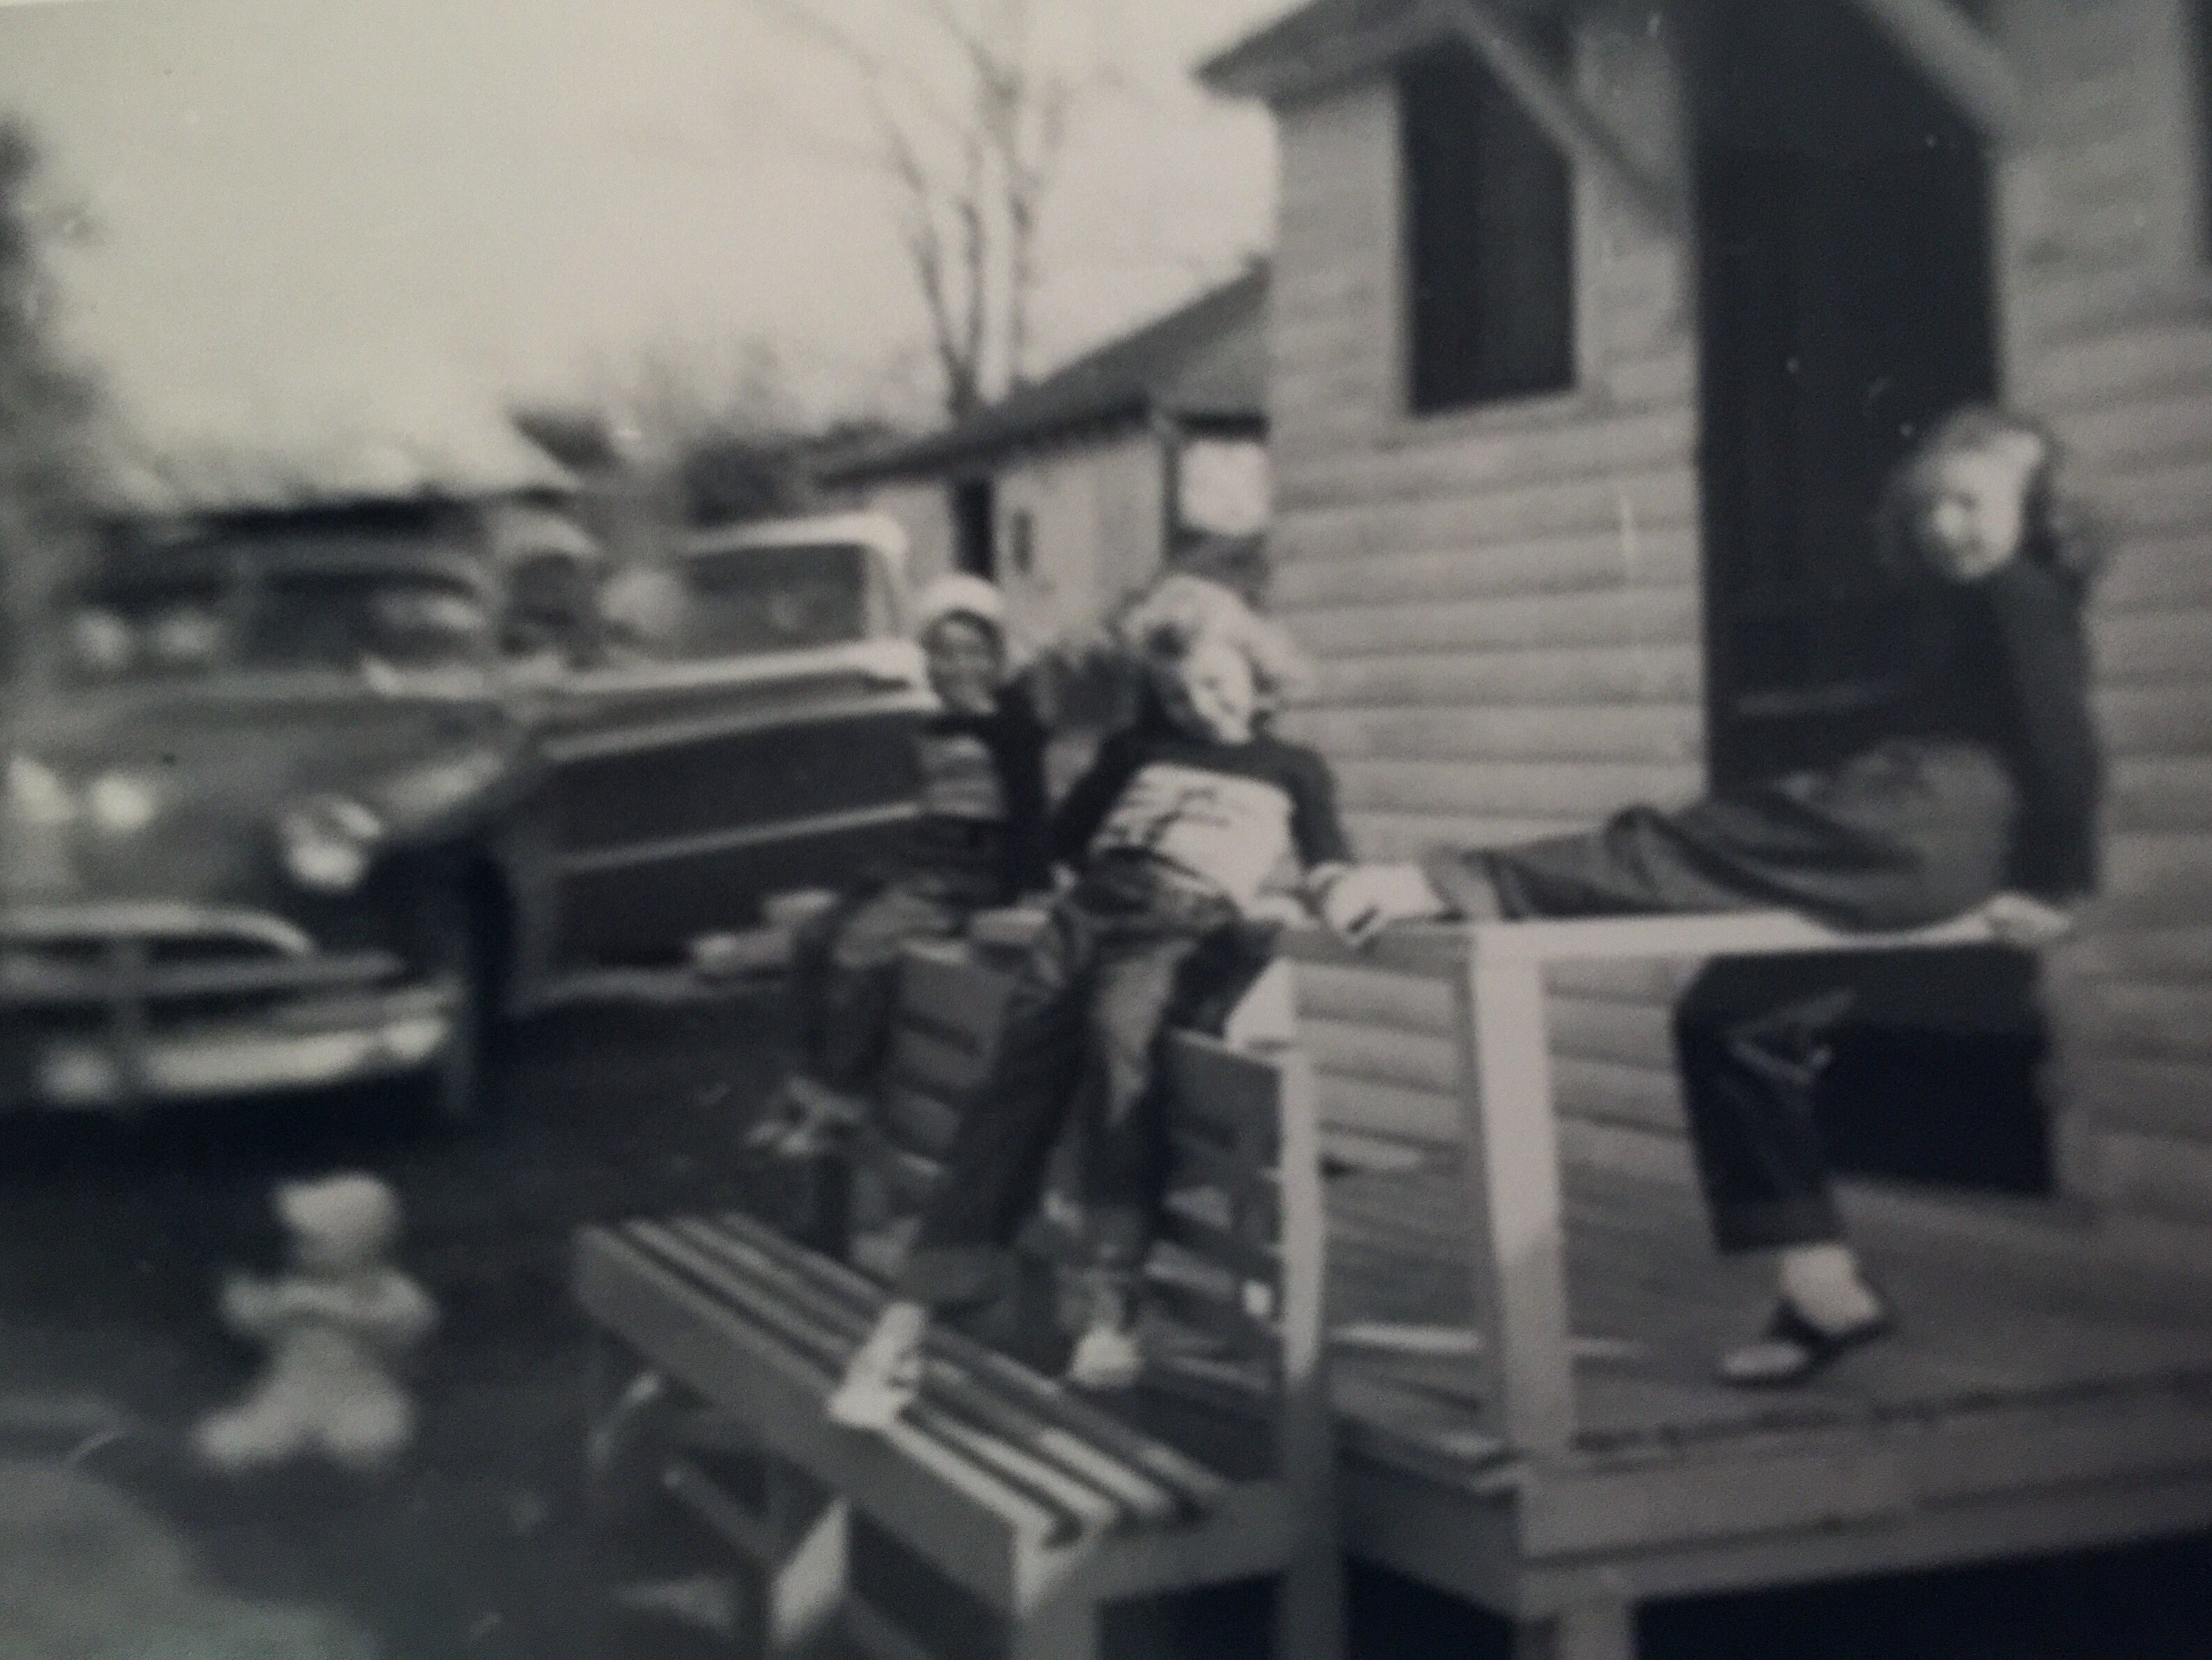 Our travels across the Great Plains from New Jersey. We had stayed in this cabin and my sister Eileen stood so close to the wall-heater that her hair caught on fire. Our mother had to cut her hair that got burned. 
We loved wearing our Rudolph sweaters we got for Christmas 1953. 